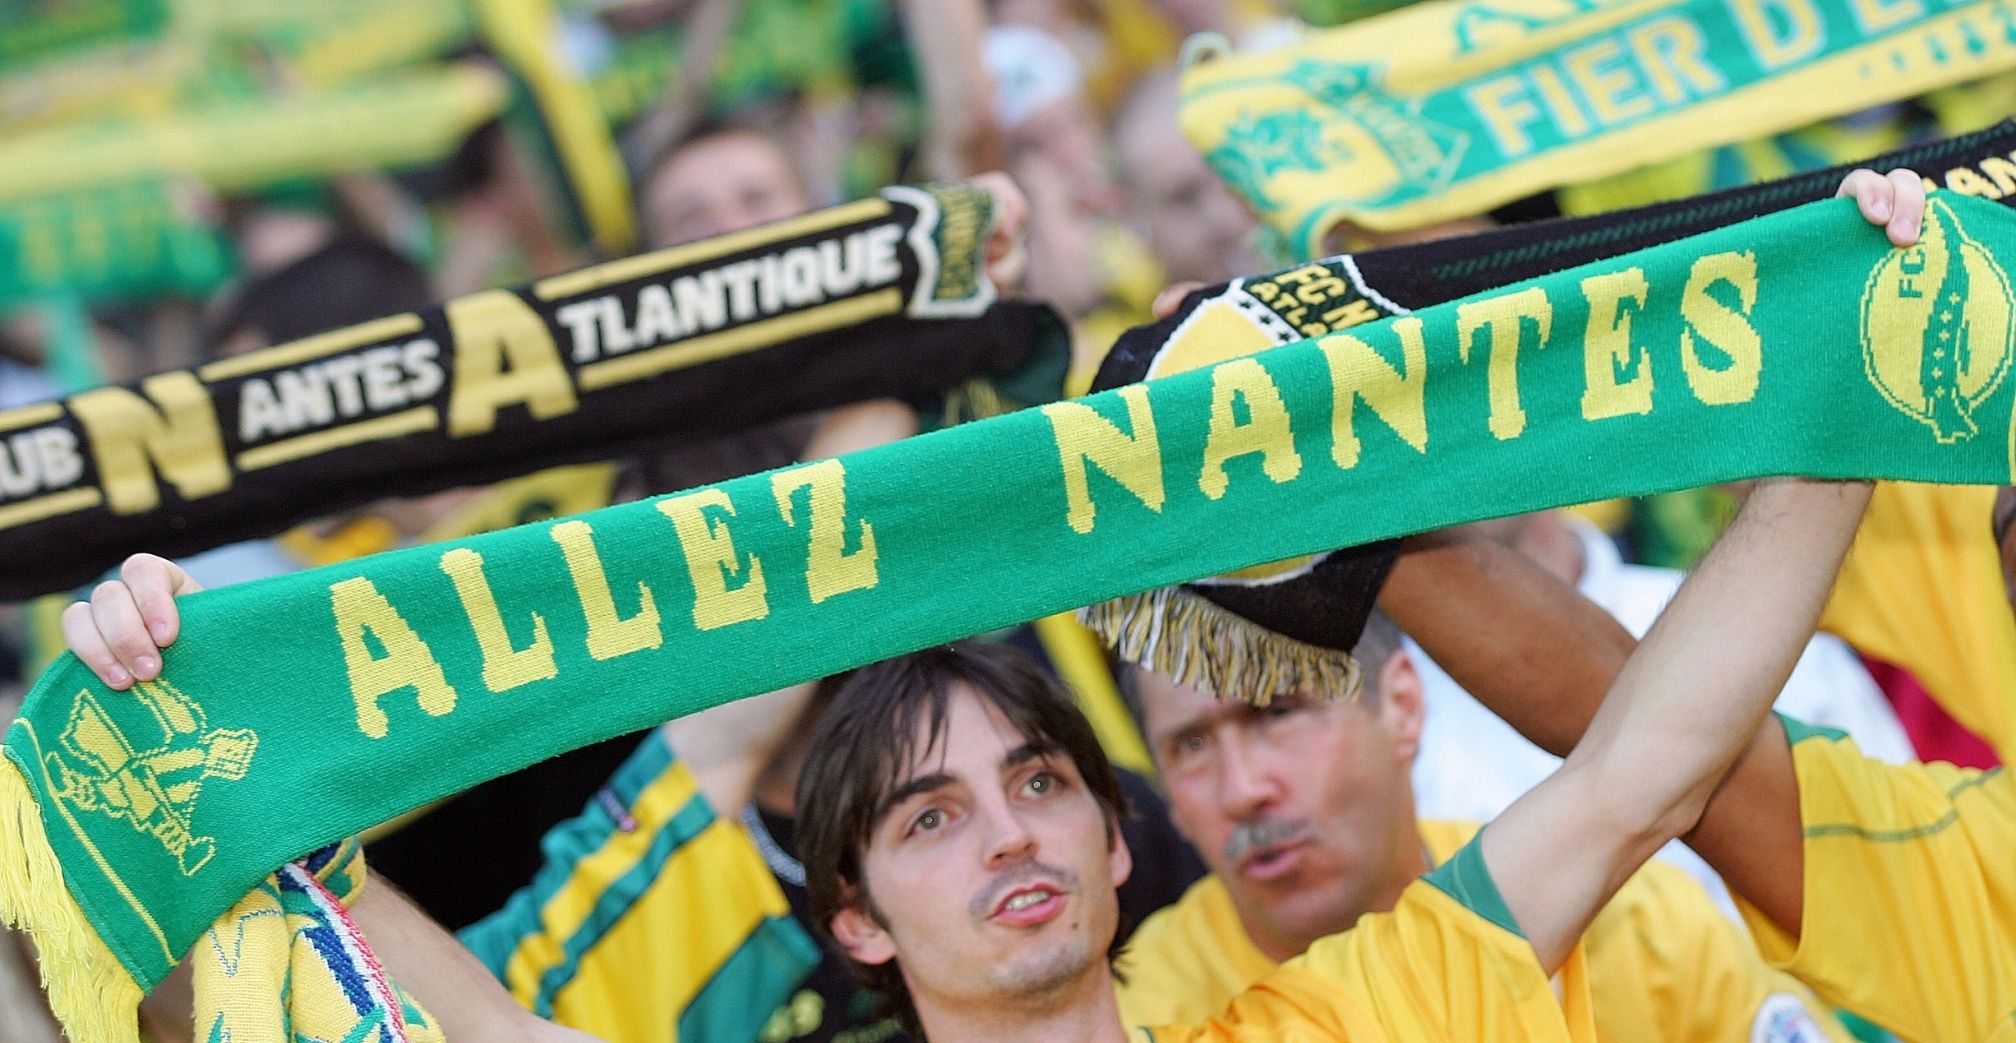 History and symbols, style and innovation in the new F.C. Nantes